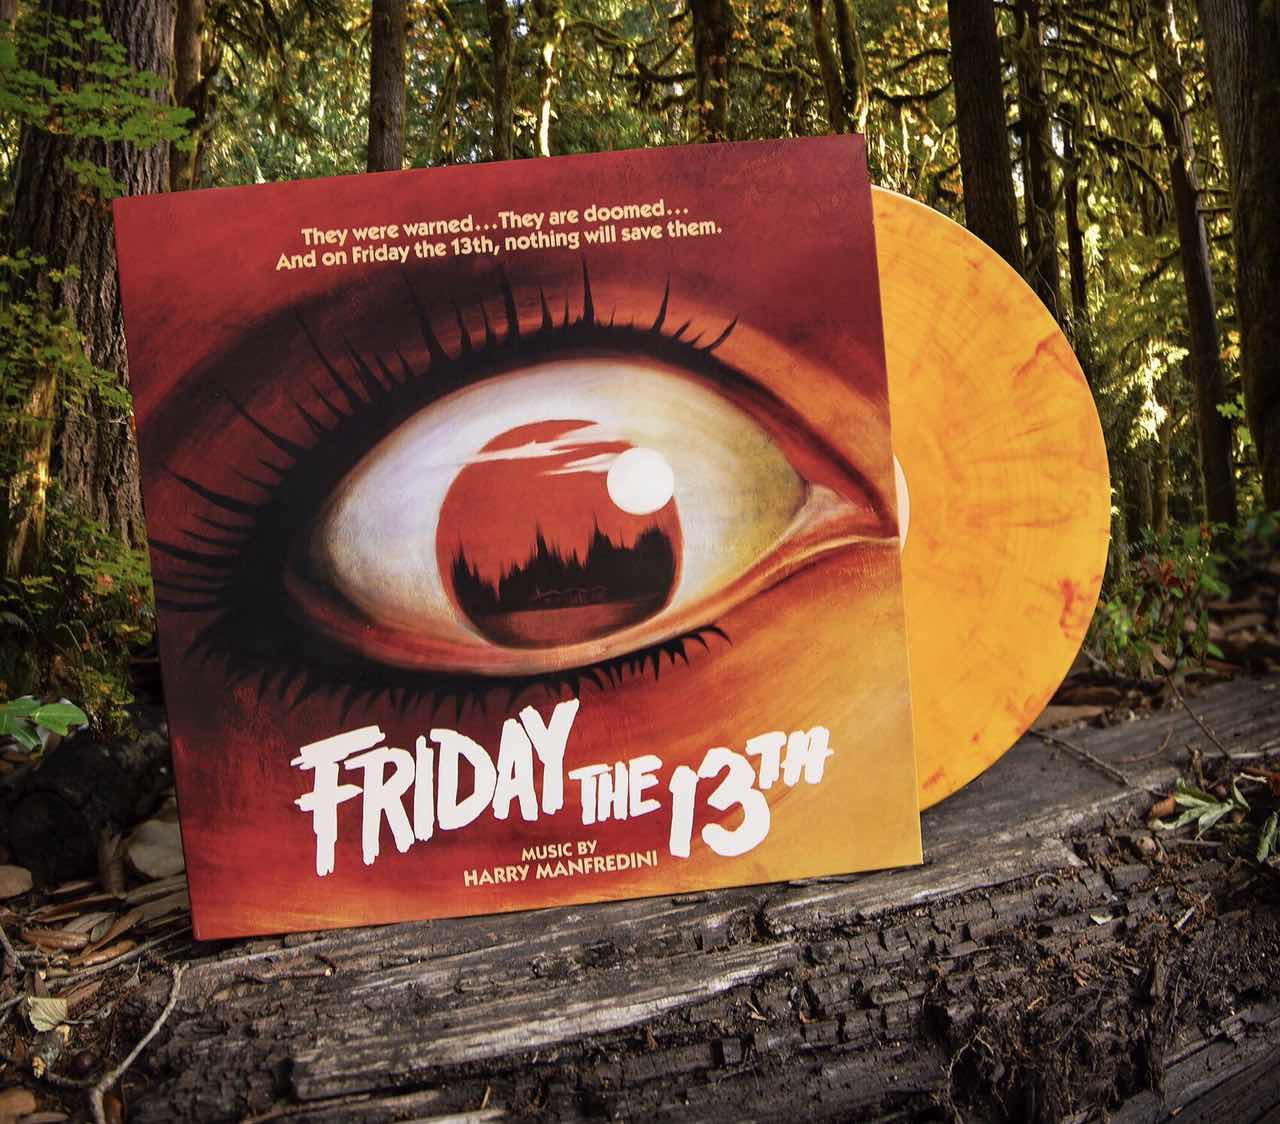 Waxwork Records Re-releasing Friday The 13th 1980 Vinyl Soundtrack This Friday!